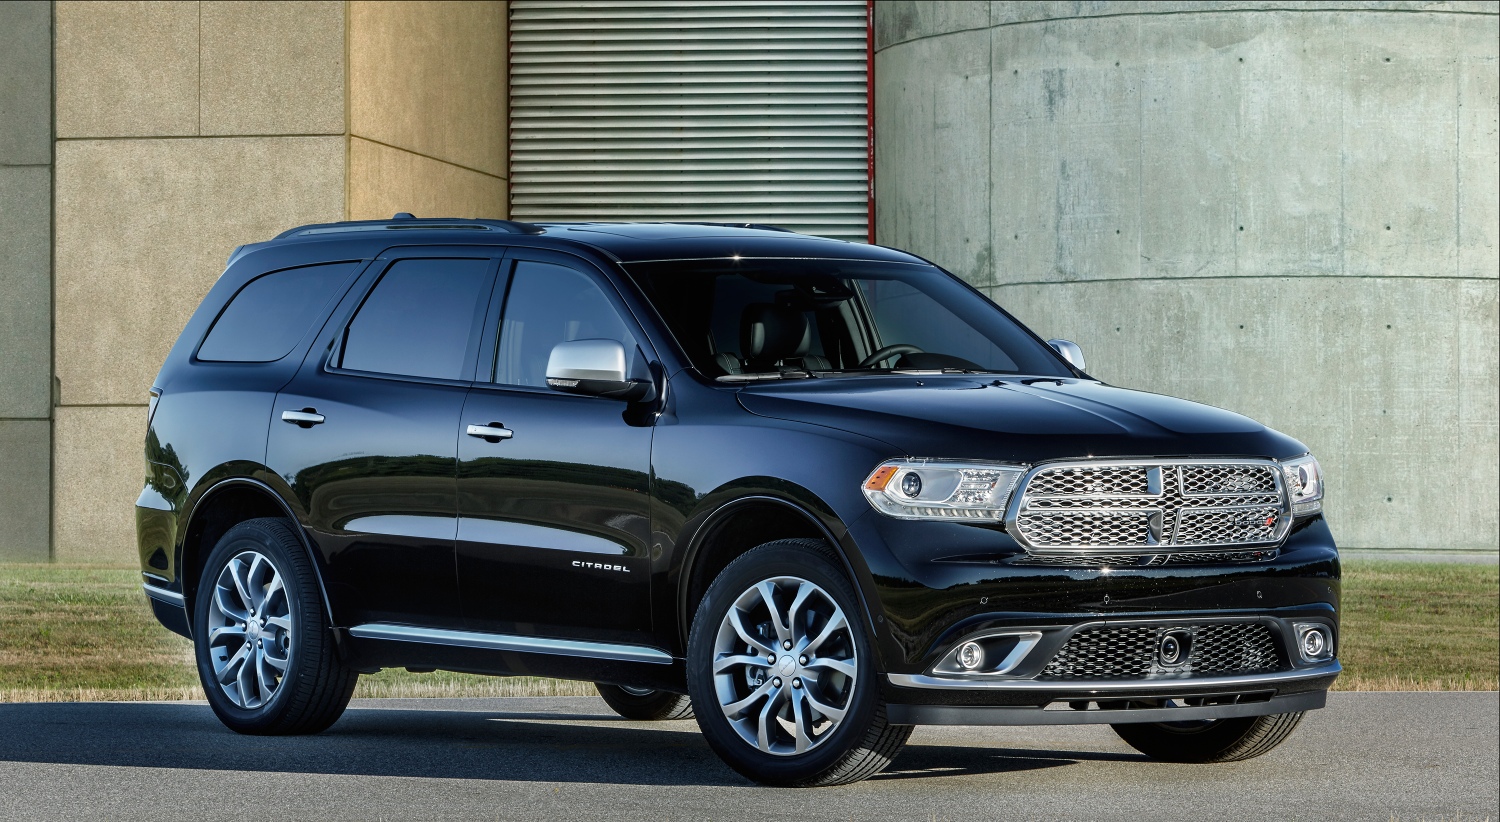 The best midsize SUVs from 2018 include the Dodge Durango